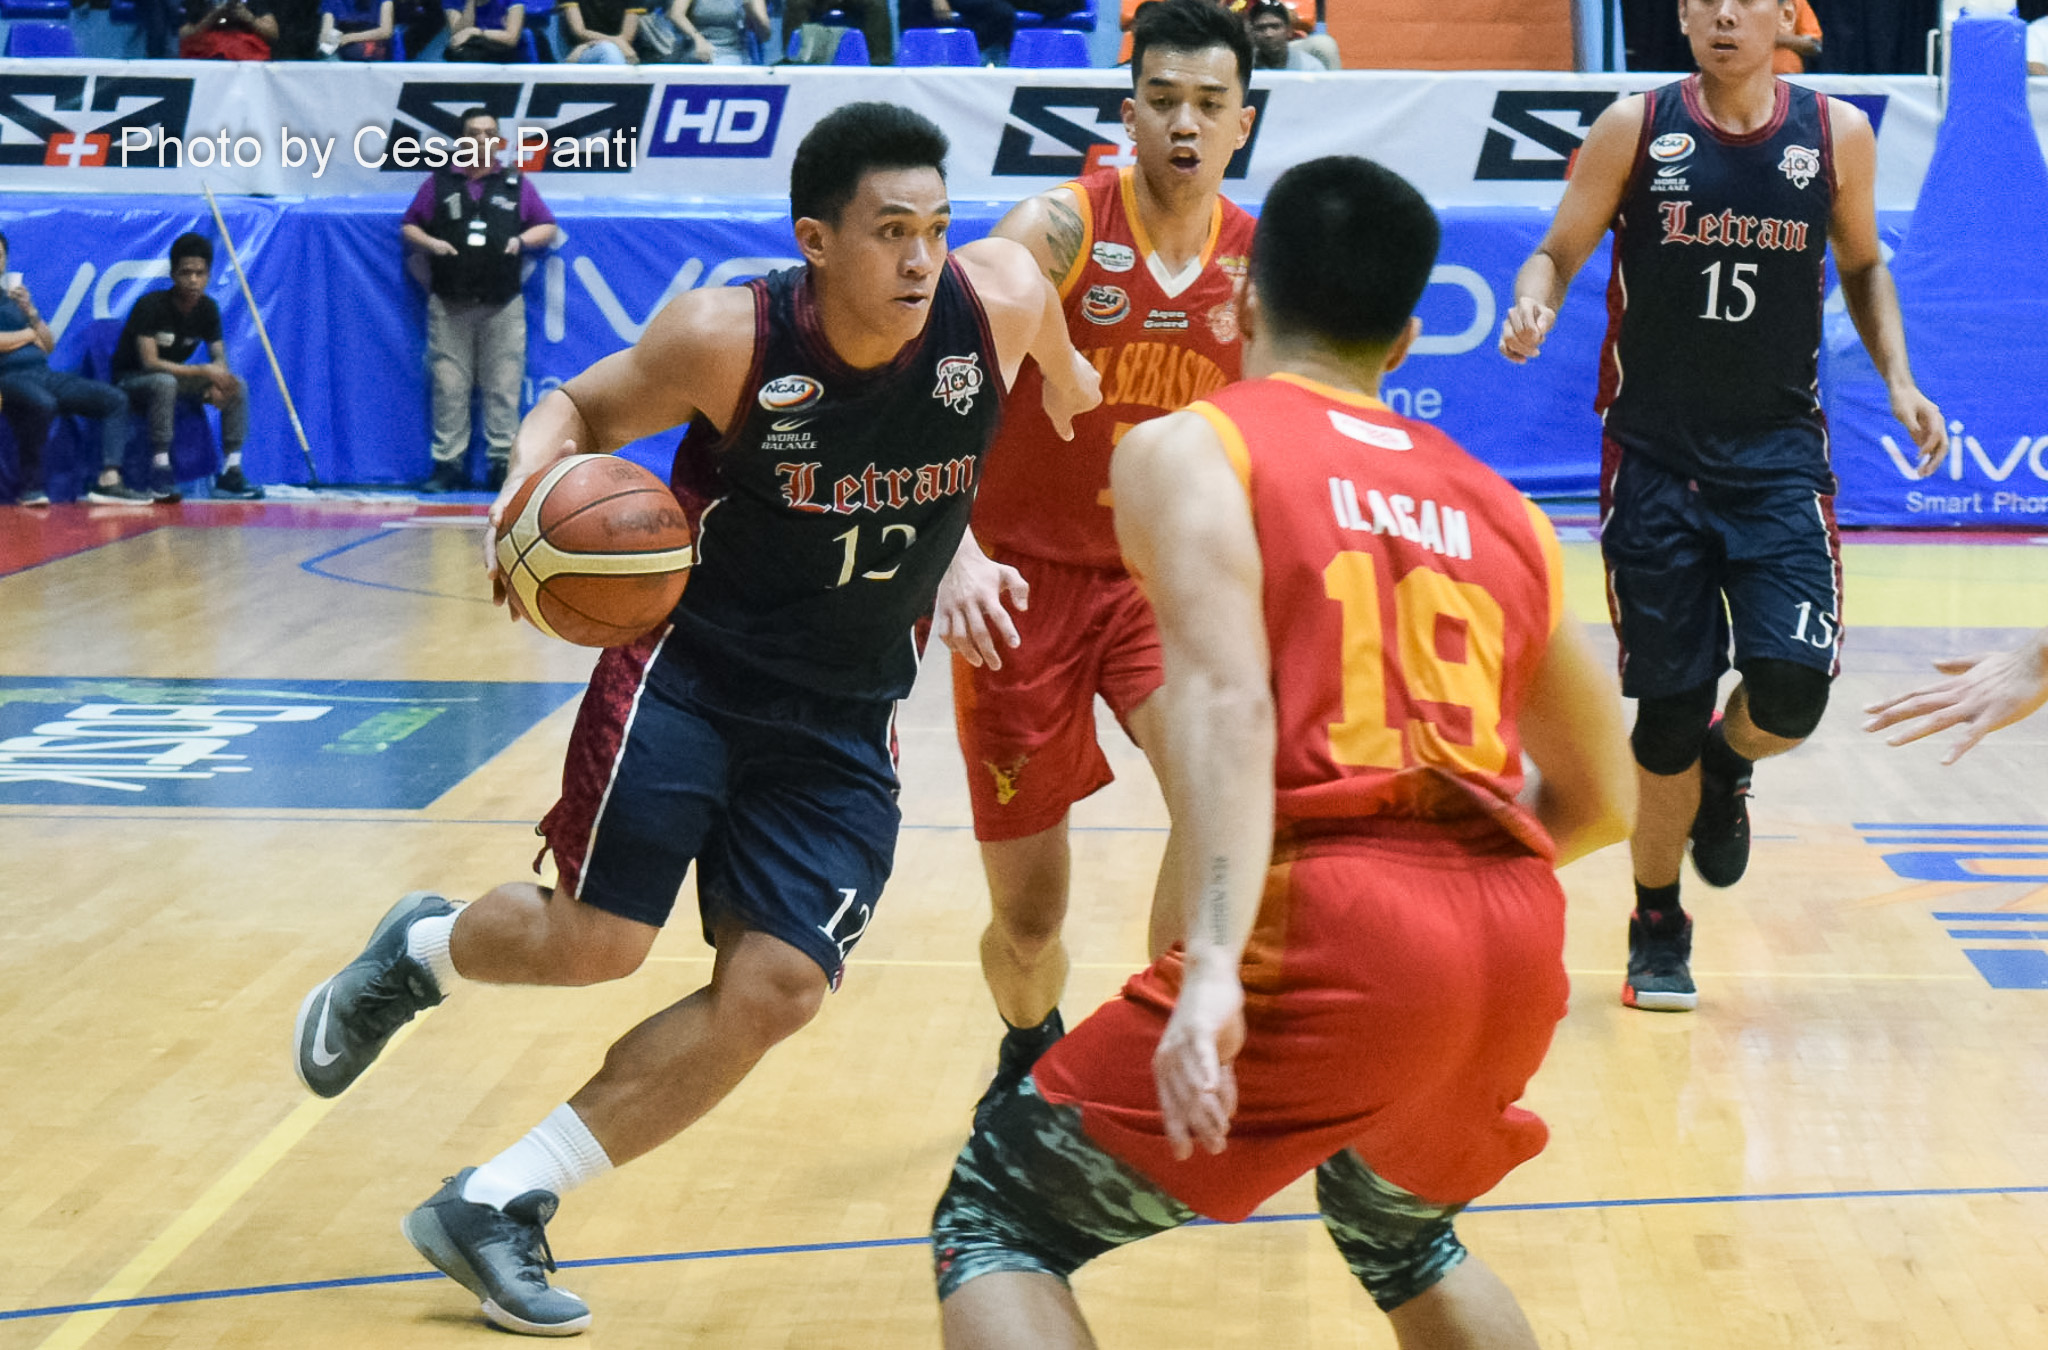 Letran clinches Final Four spot, overpowers Baste